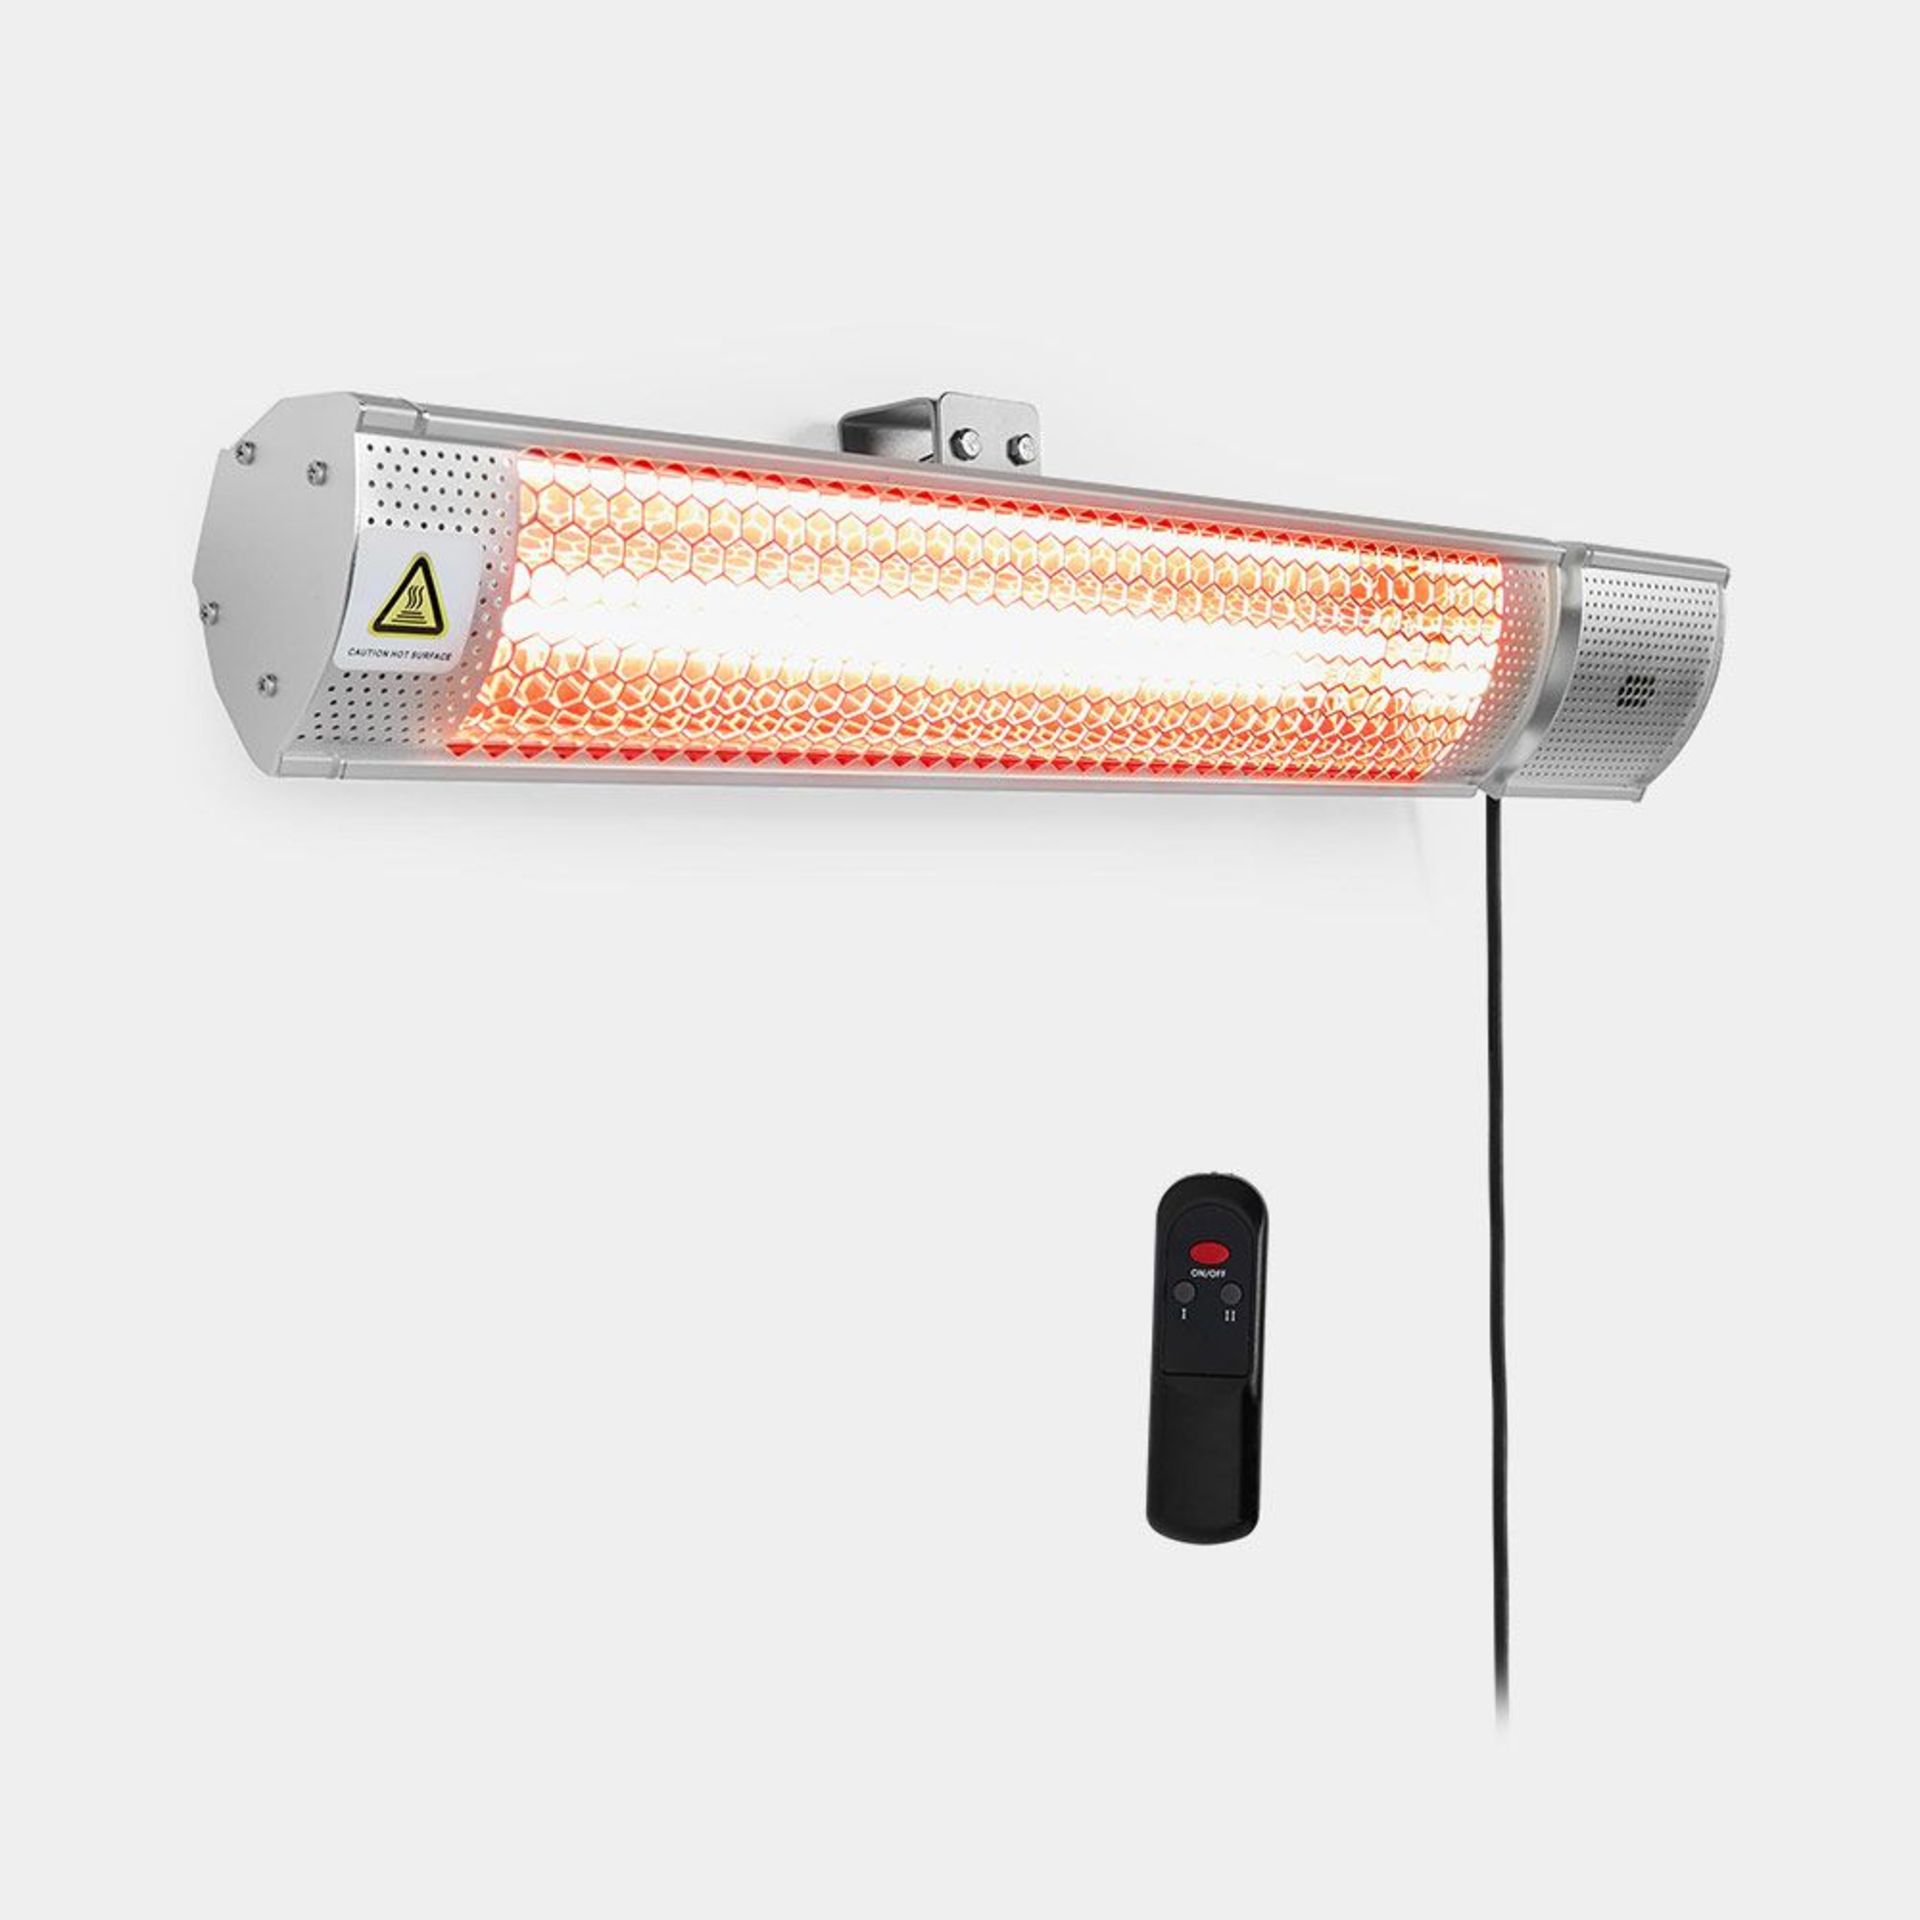 Wall Mounted Infrared Patio Heater. - BI. With a superfast heating element that heats up in just